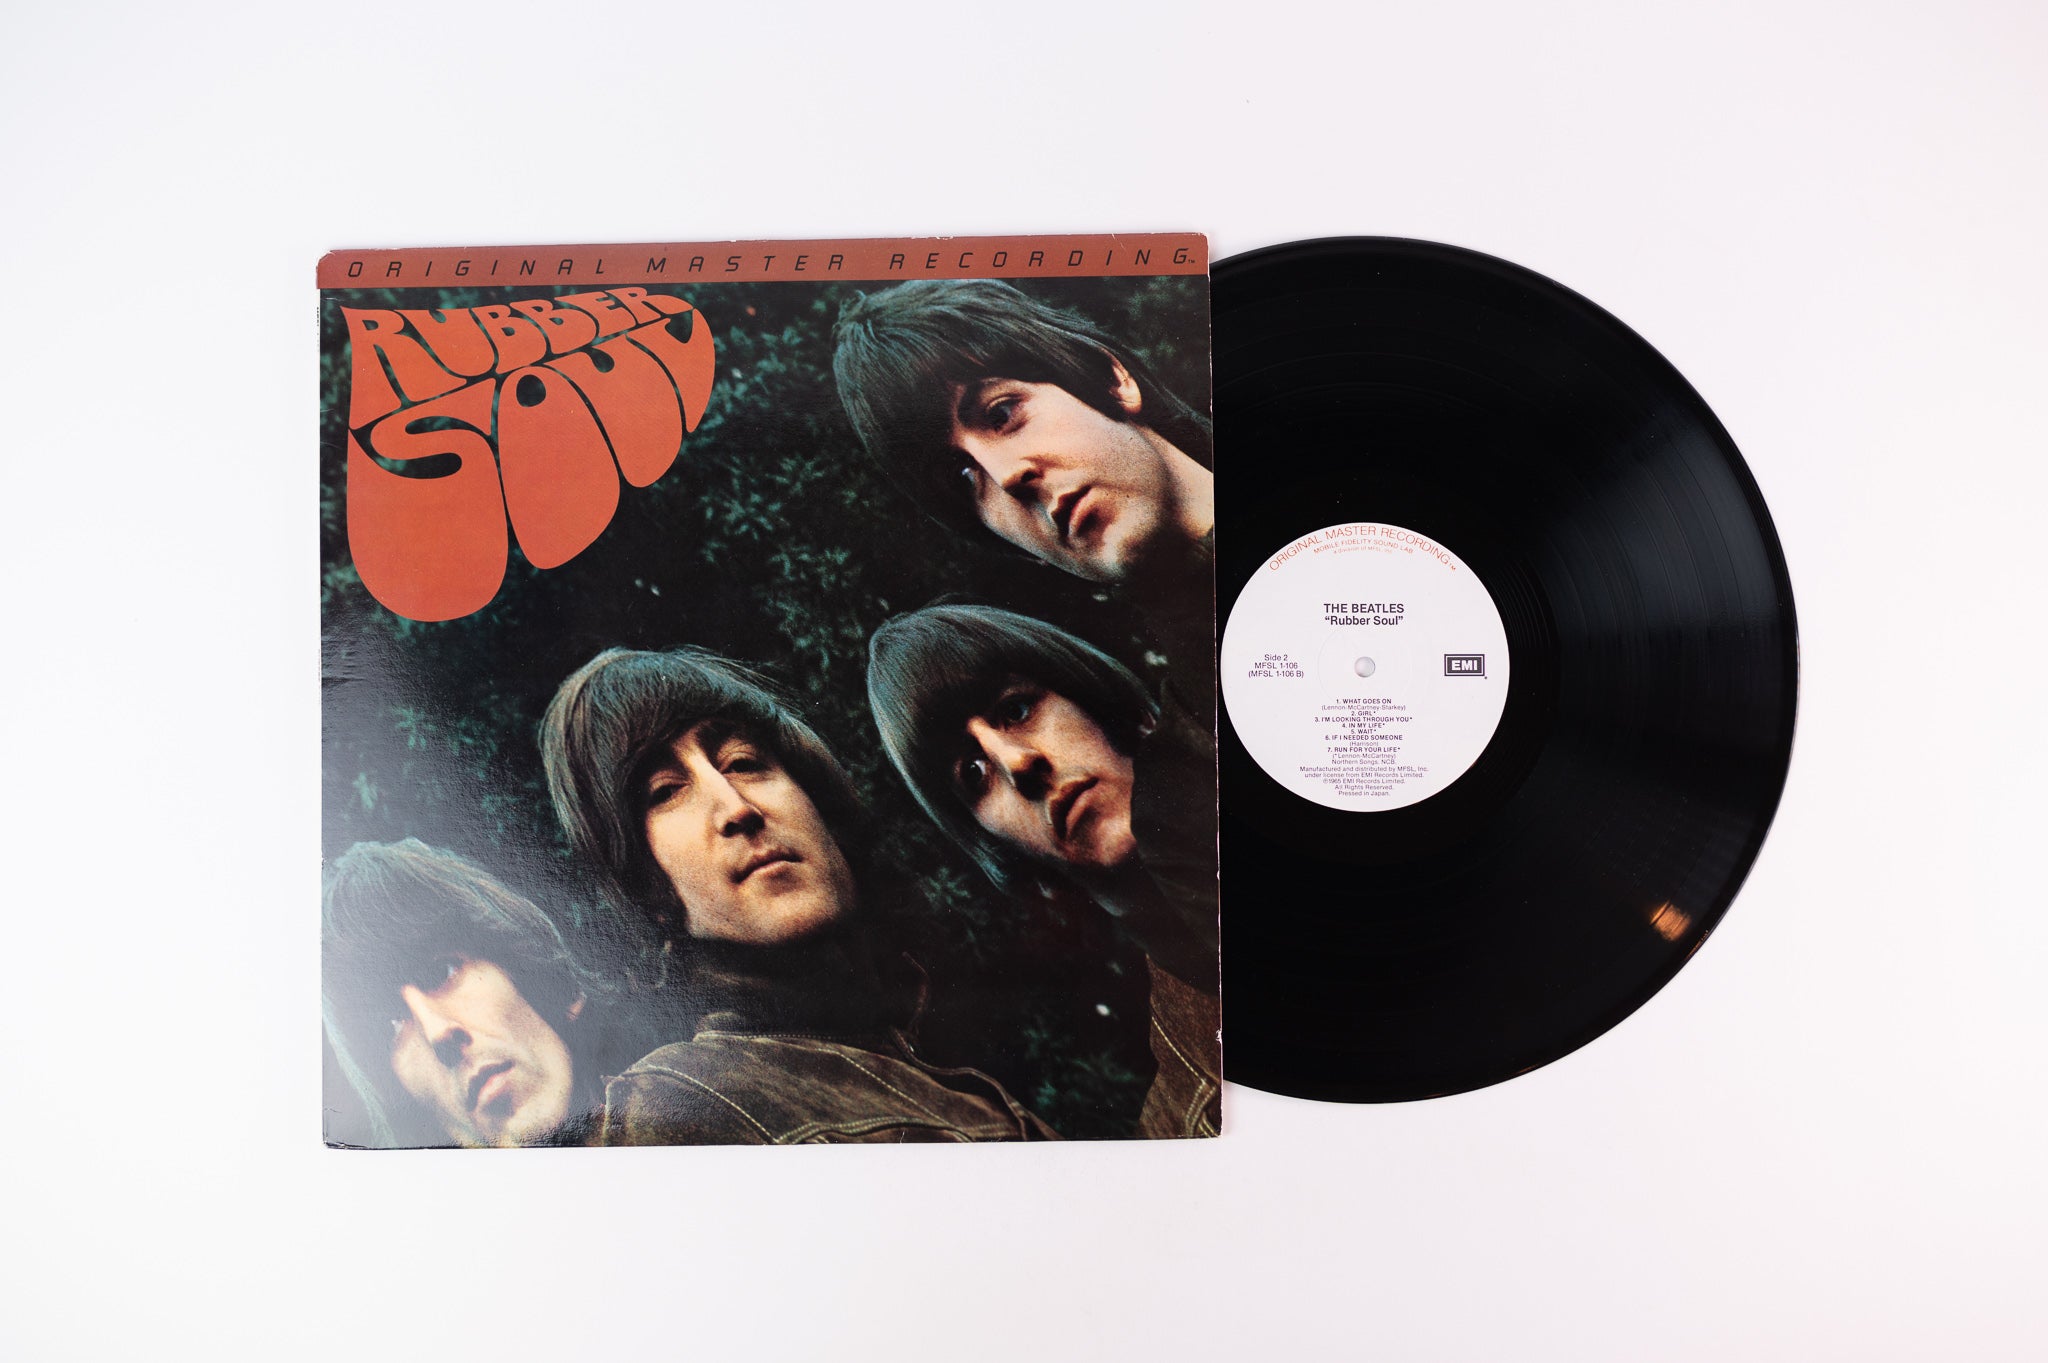 The Beatles - Rubber Soul on Mobile Fidelity Sound Lab MFSL Reissue